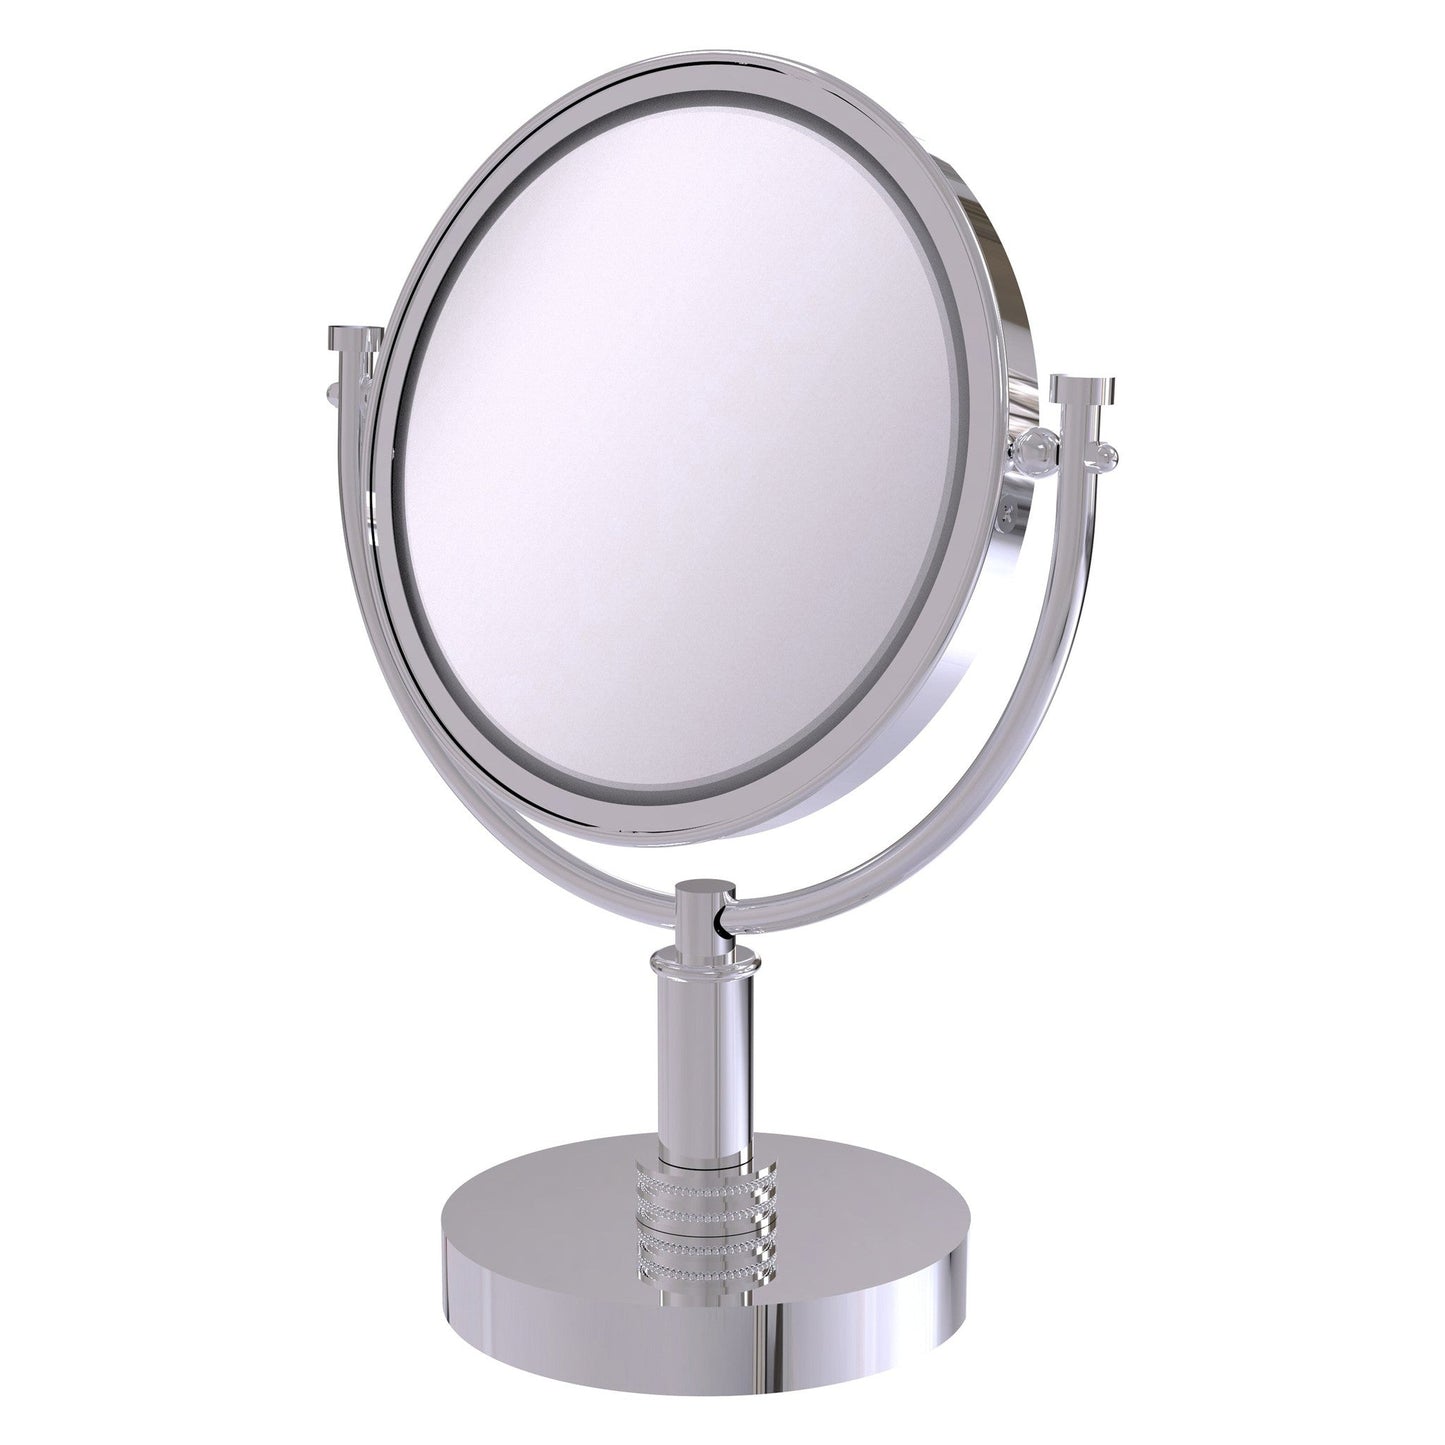 Allied Brass DM-4D/5X 8" x 8" Polished Chrome Solid Brass Vanity Top Make-Up Mirror 5X Magnification